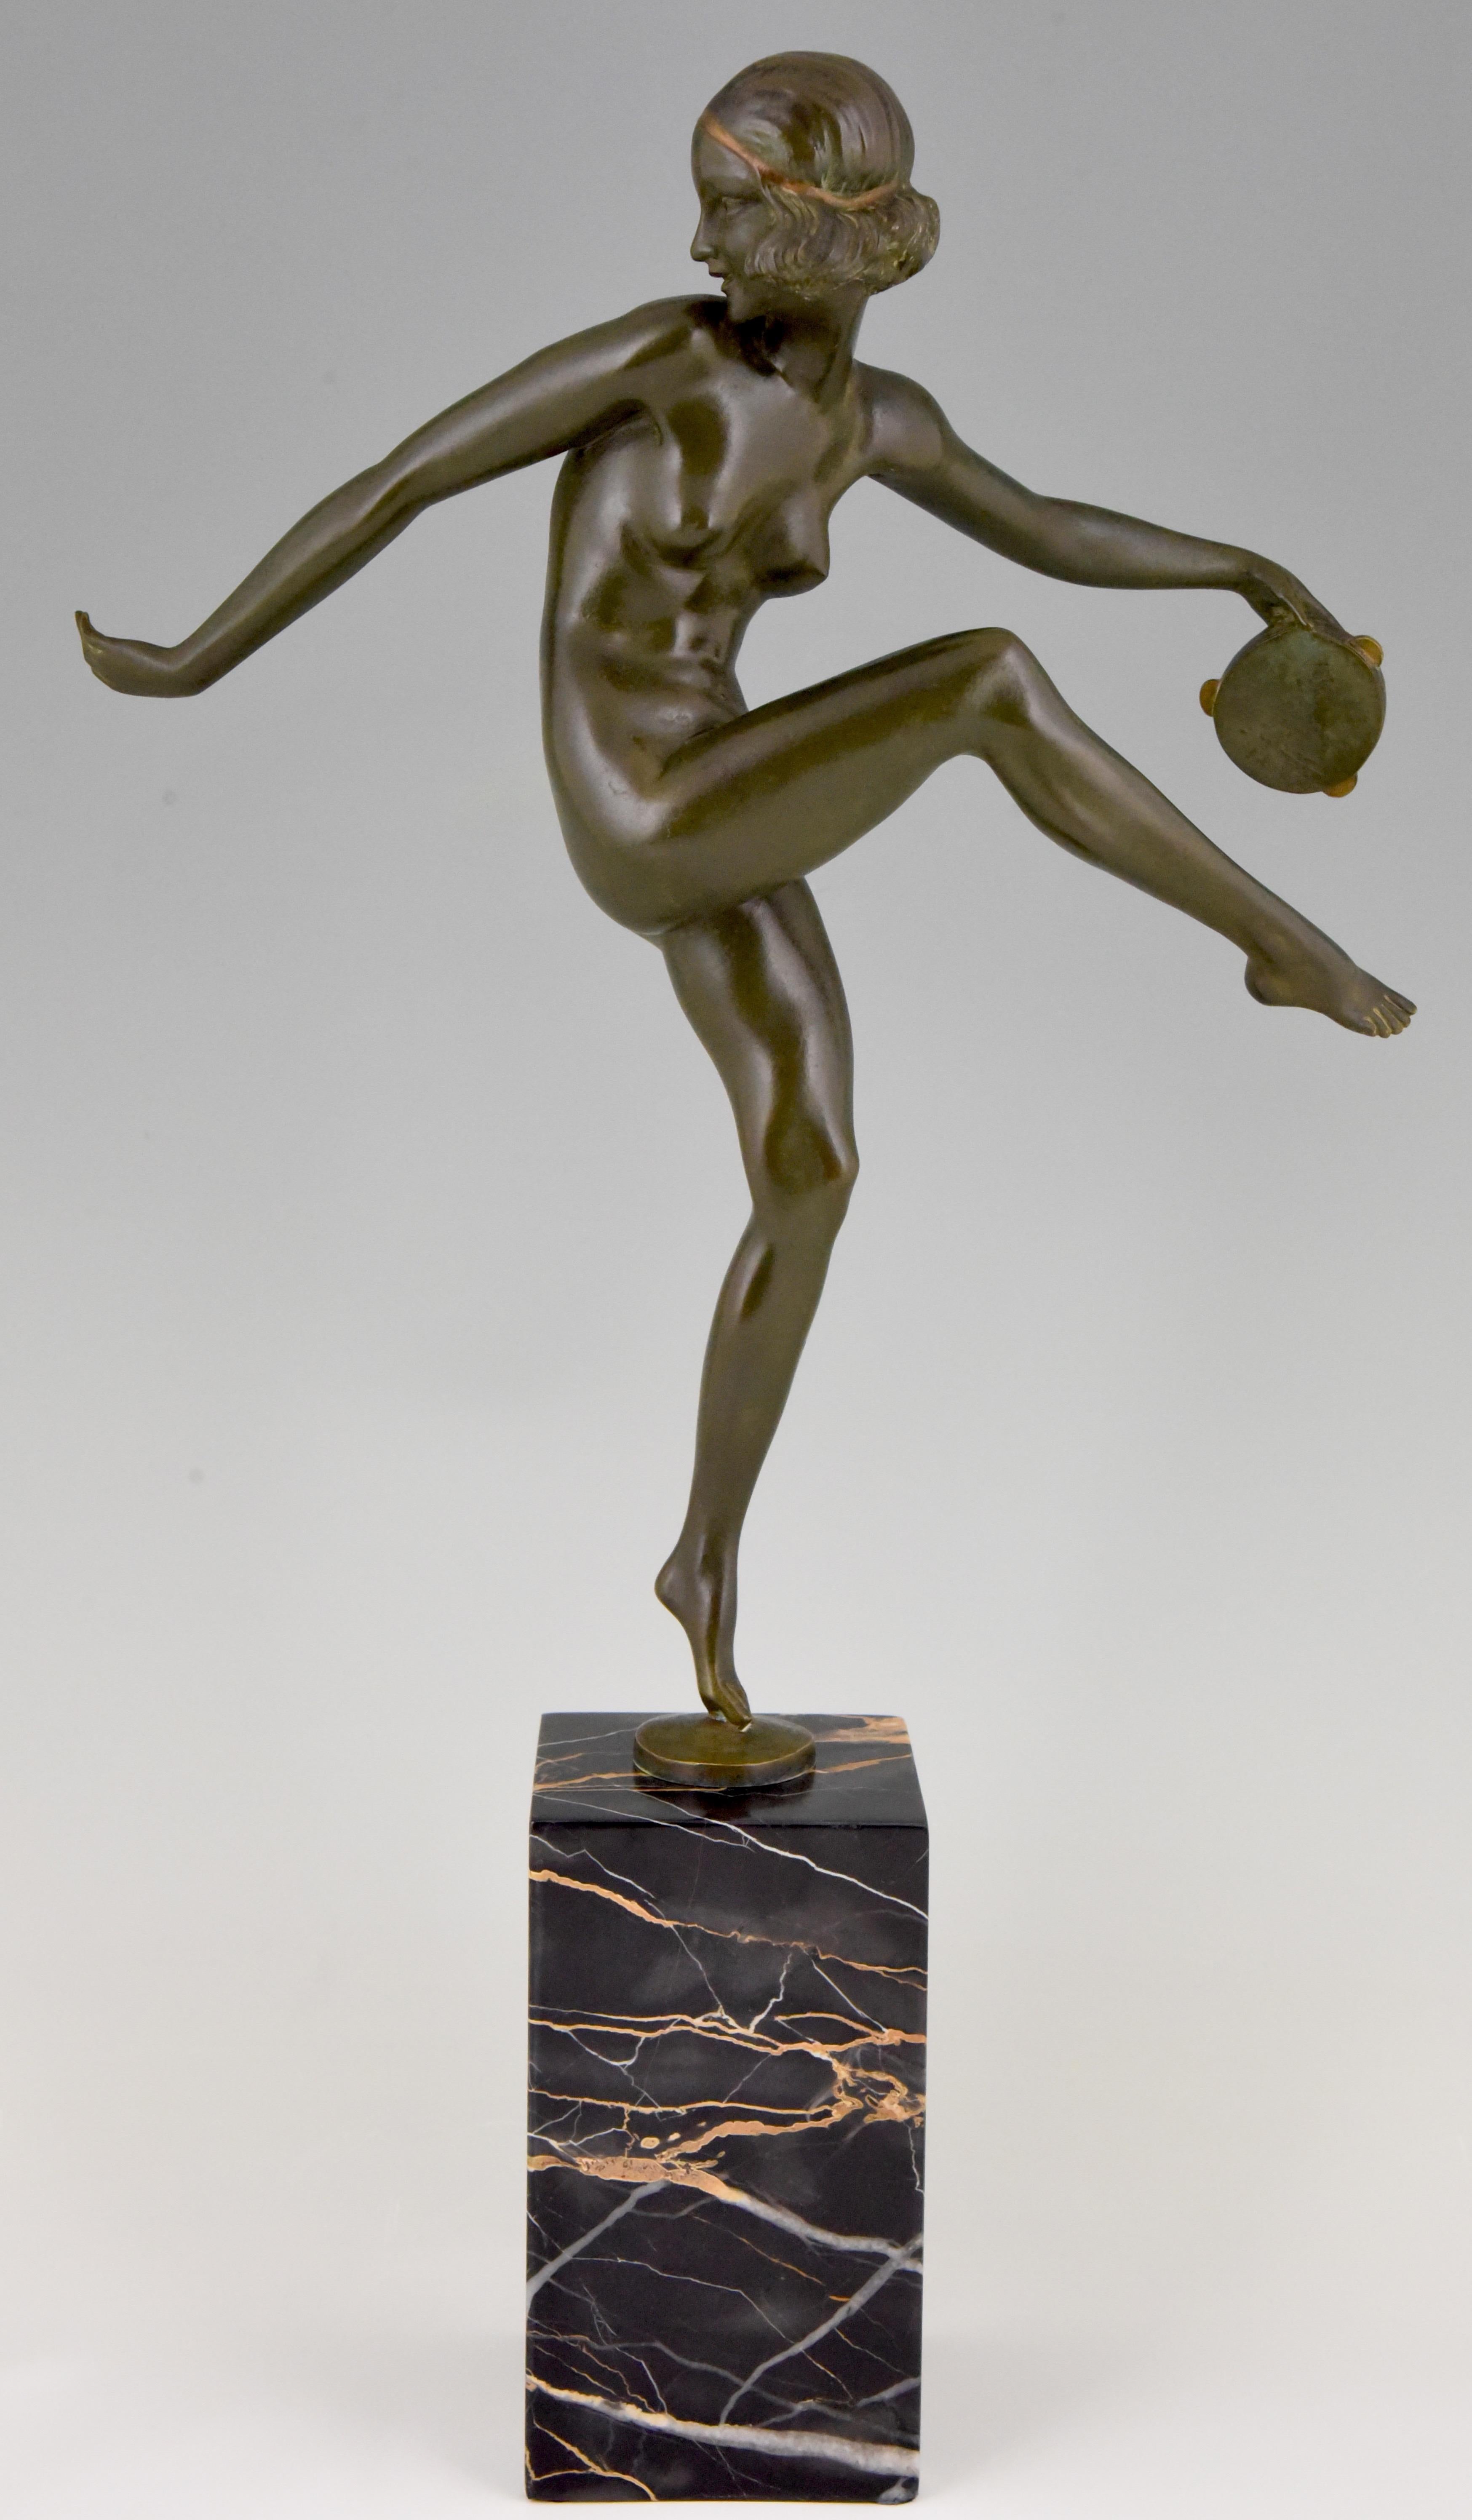 Elegant Art Deco bronze sculpture of a dancing nude with tambourine. The bronze has a lovely patina and stands on a Portor marble base. The sculpture is signed Laurel, pseudonym of Pierre Le Faguays, is numbered and has the foundry mark of Marcel